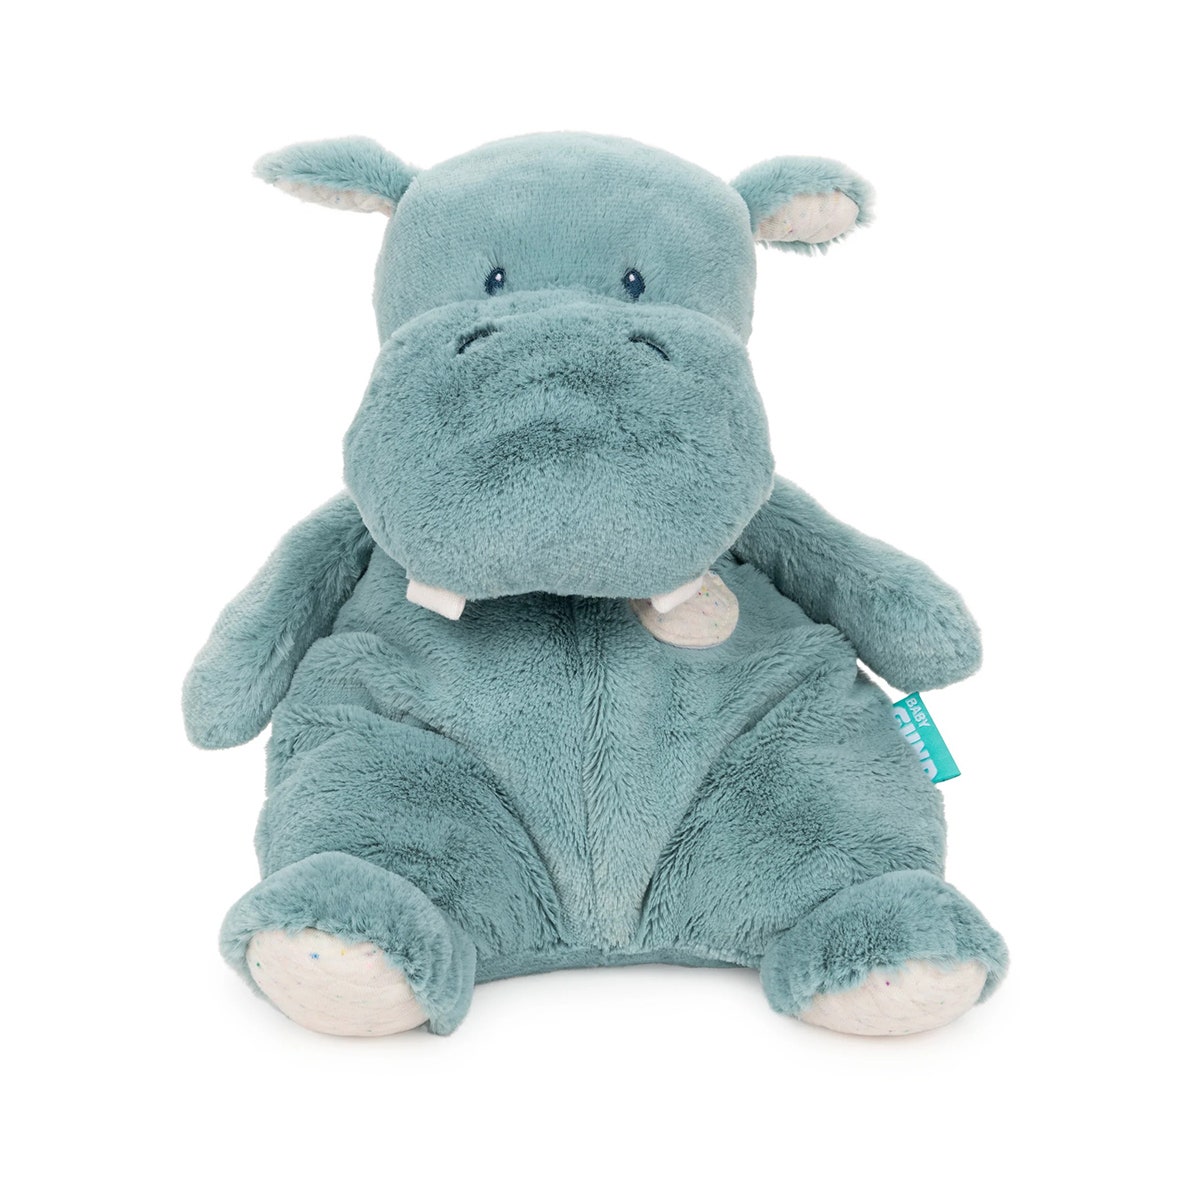 And so begins their baby's hyper-specific obsession with hippopotamuses. $25, Mori. <a href="https://us.babymori.com/products/gund-oh-so-snuggly-hippo?variant=39831538073713">Get it now!</a>